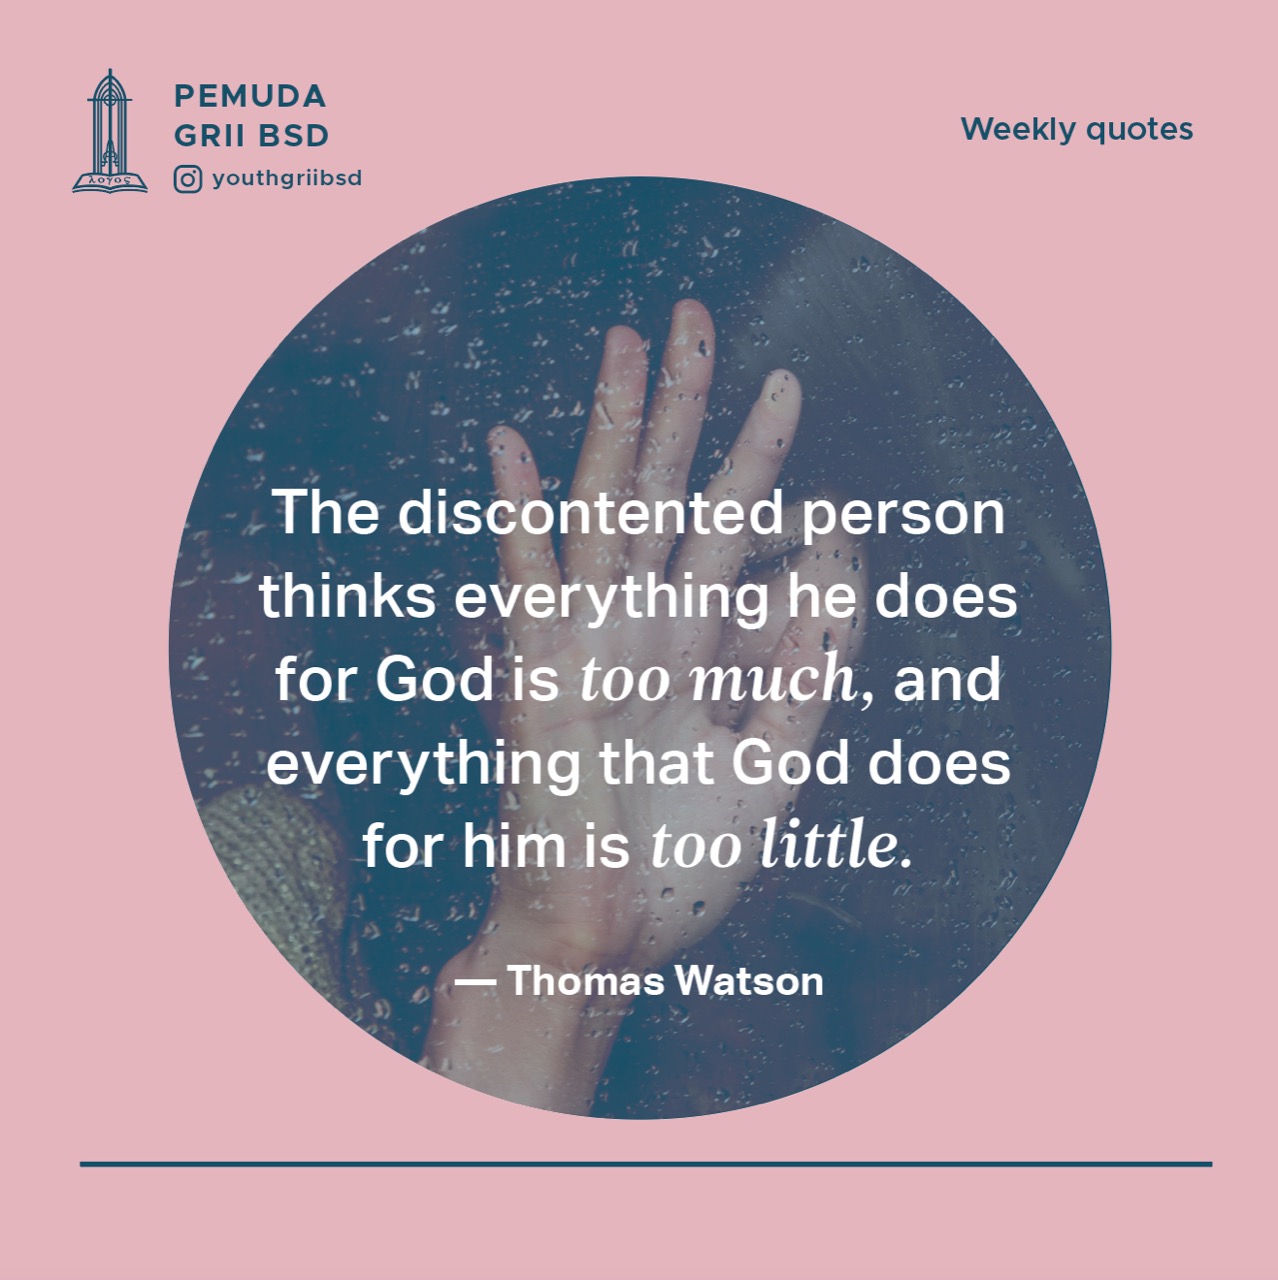 The discontented person thinks everything he does for God is too much, and everything that God does for him is too little.